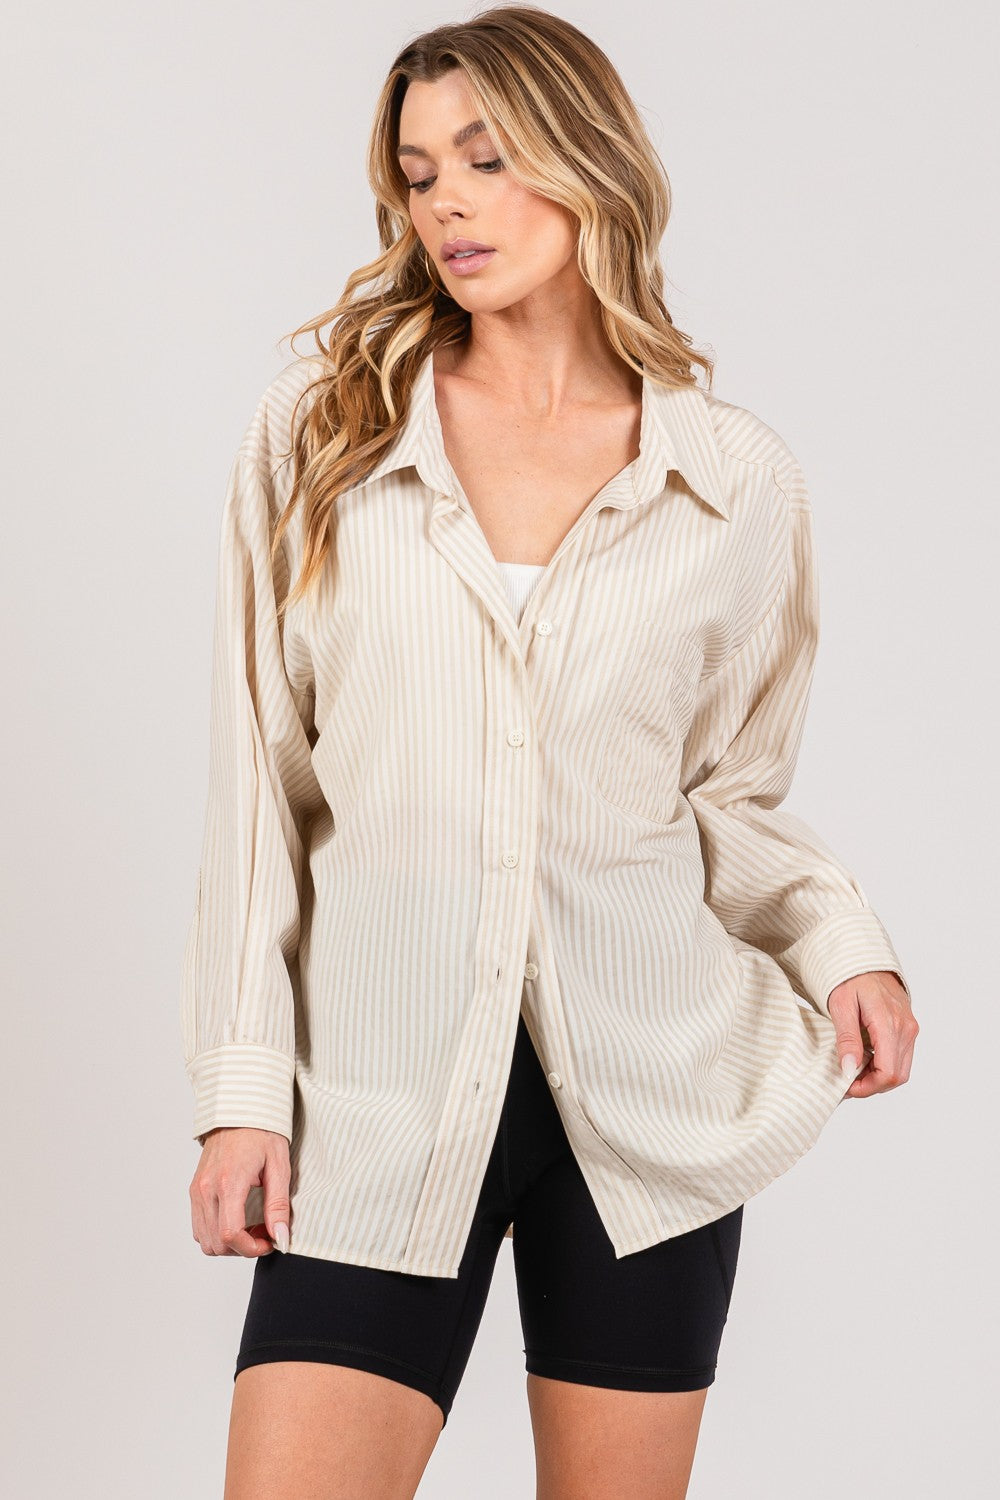 SAGE + FIG Striped Button Up Long Sleeve Shirt